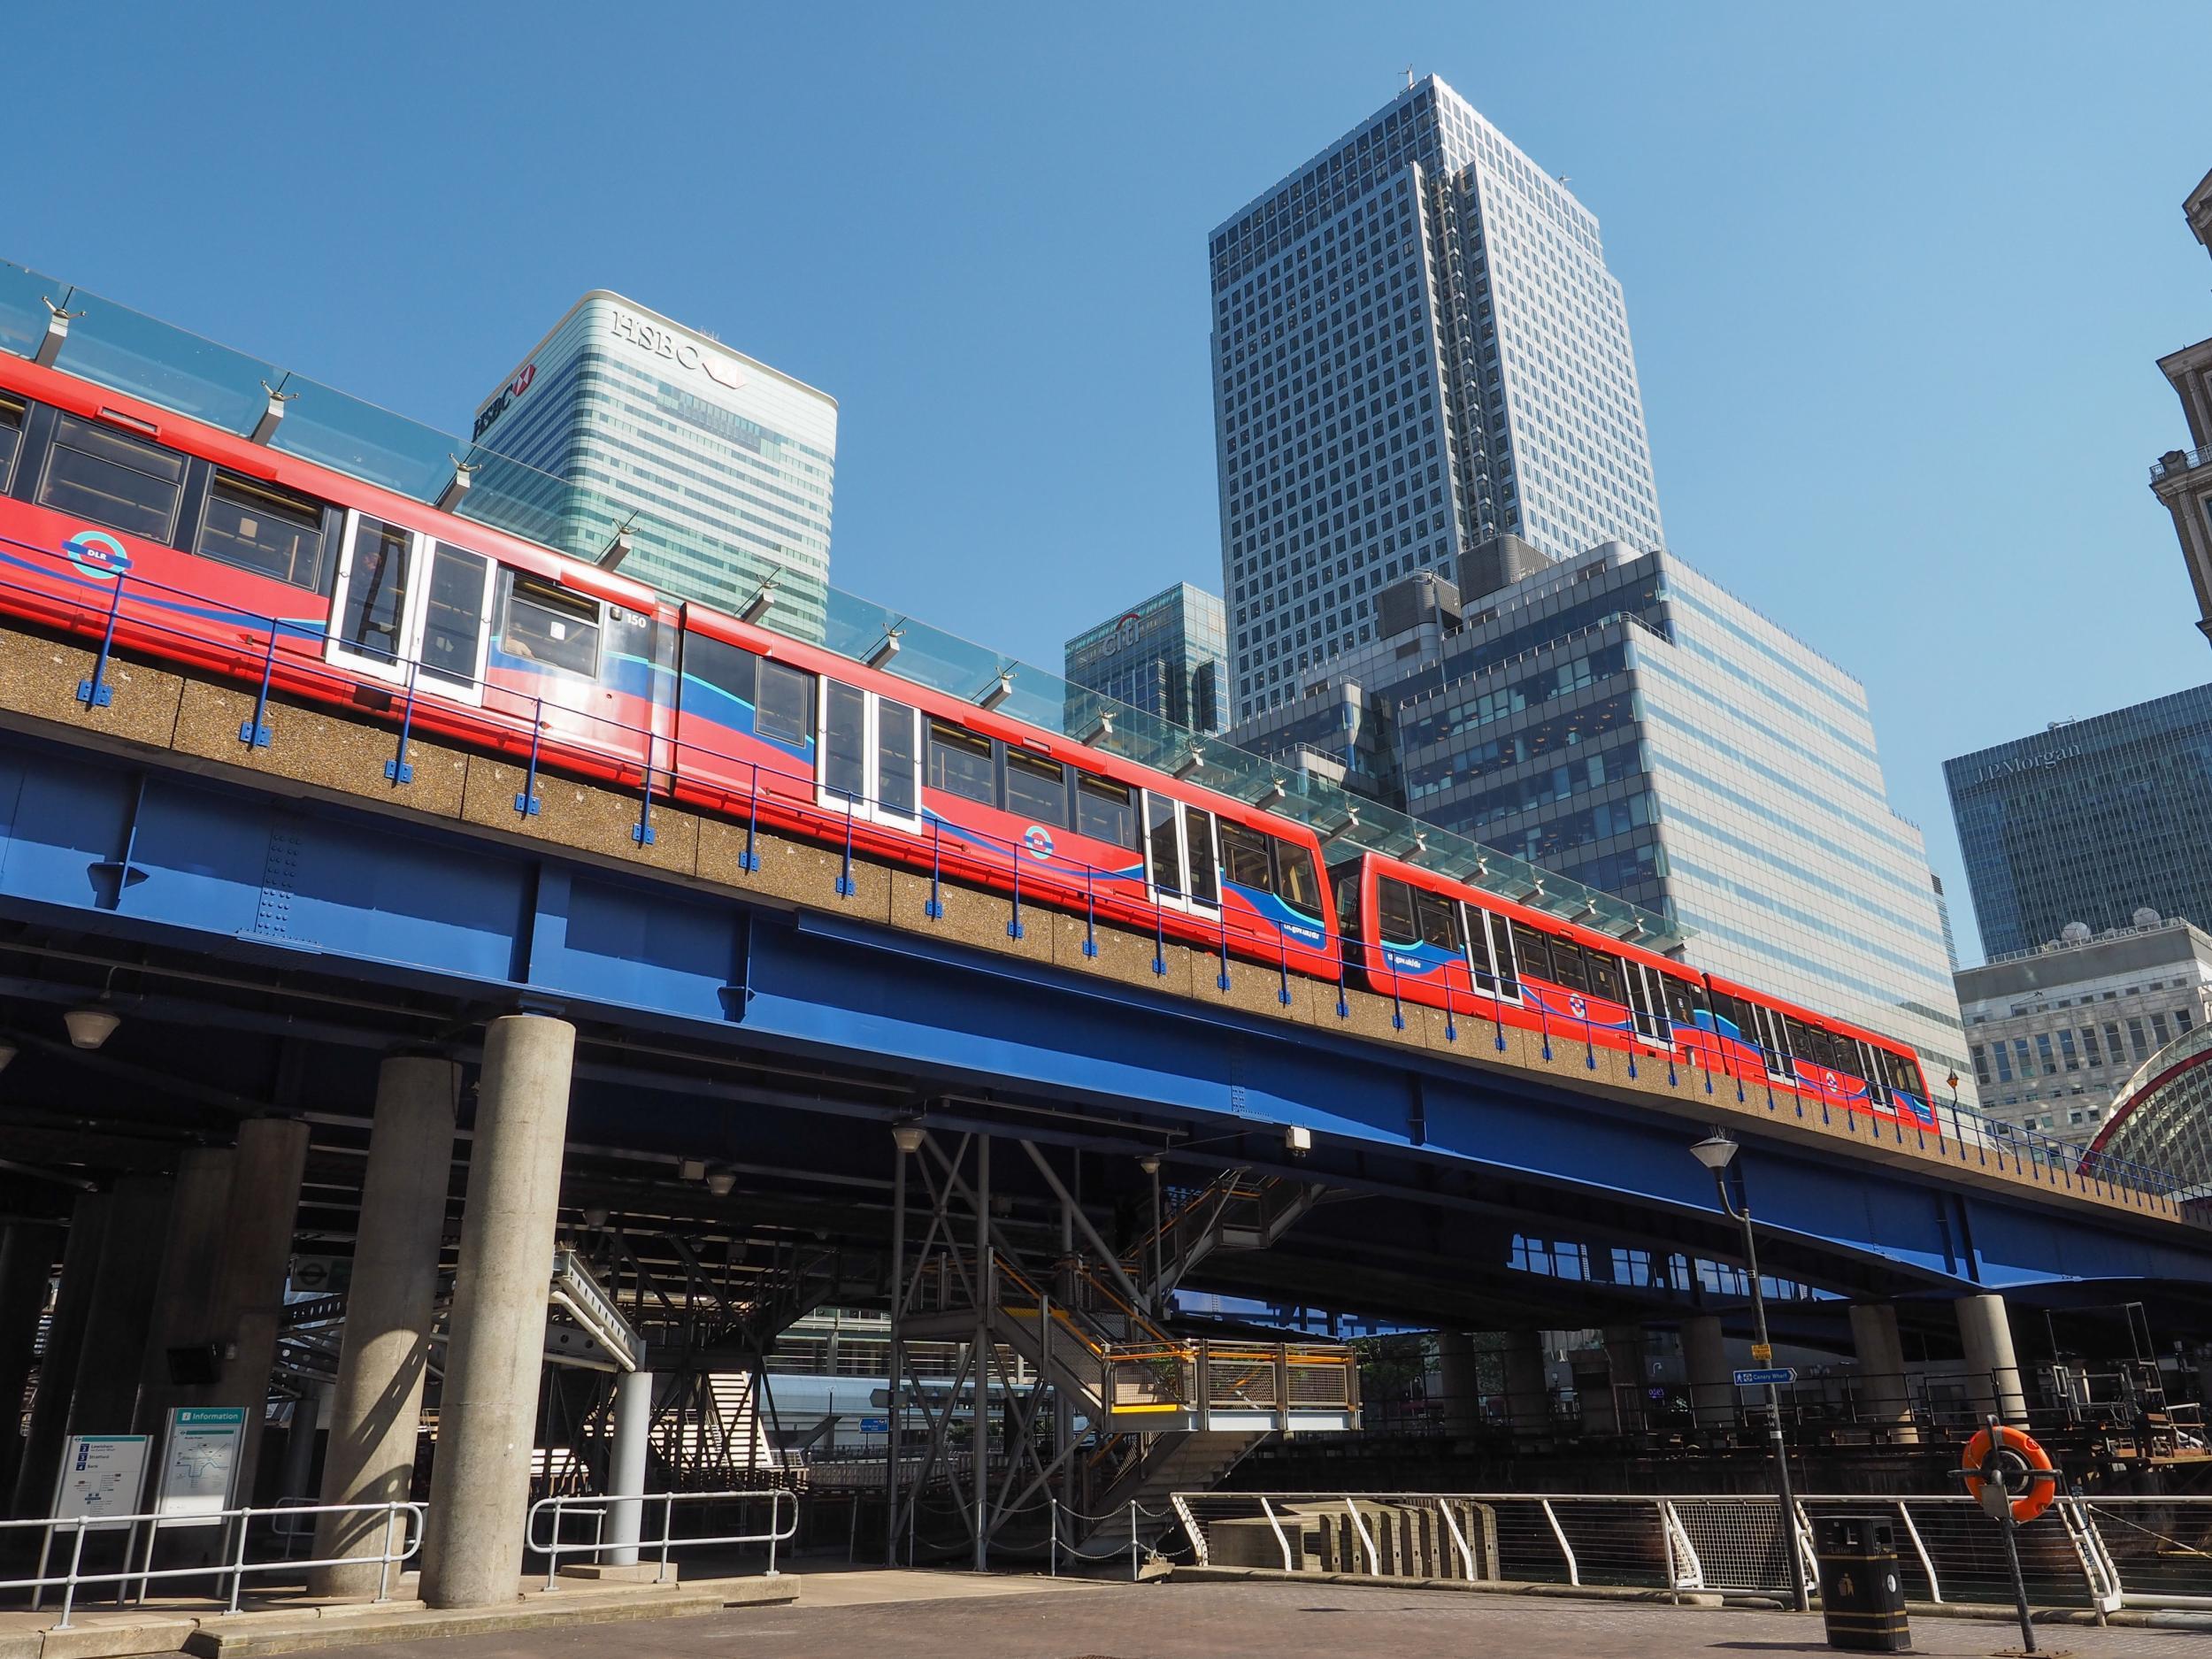 The Docklands Light Railway takes you from the City of London to London City